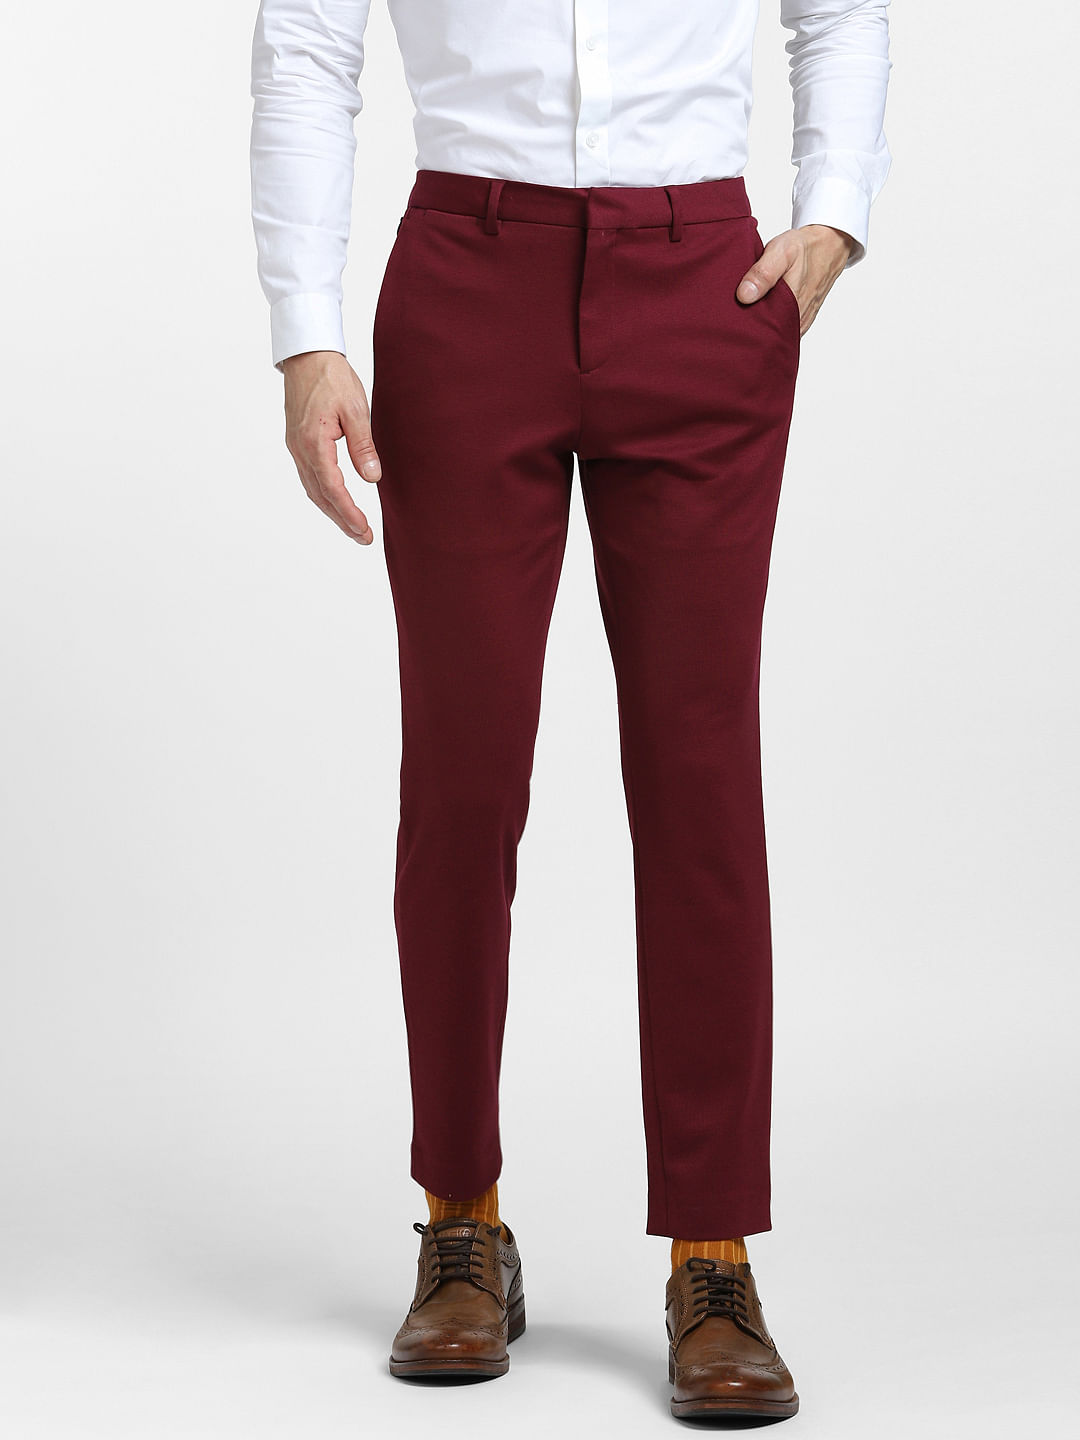 ASOS DESIGN super skinny suit trousers in burgundy in four way stretch   ASOS